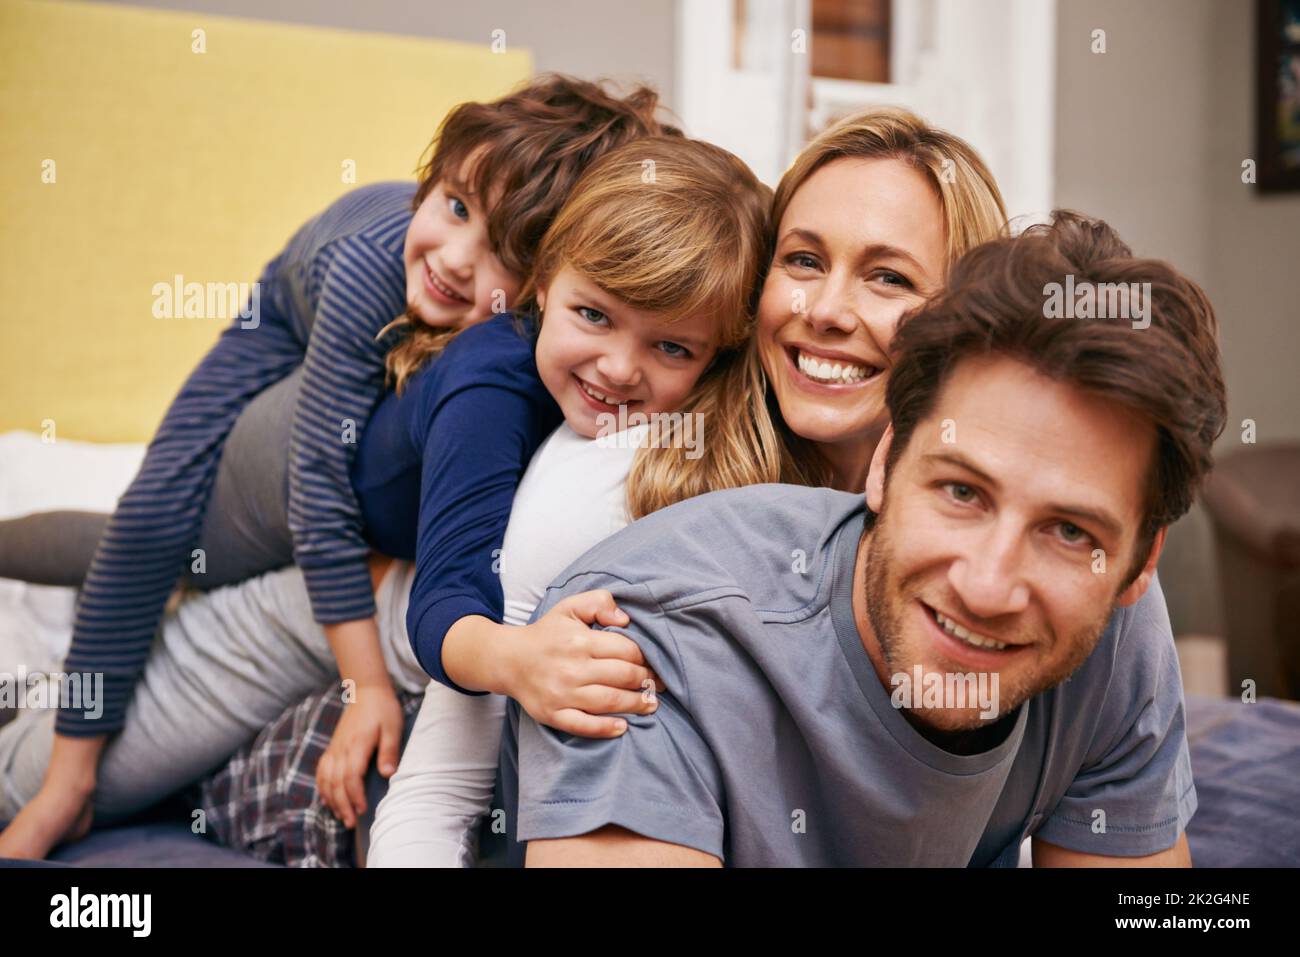 Bonding before bedtime. Portrait of a young family being playful at home. Stock Photo